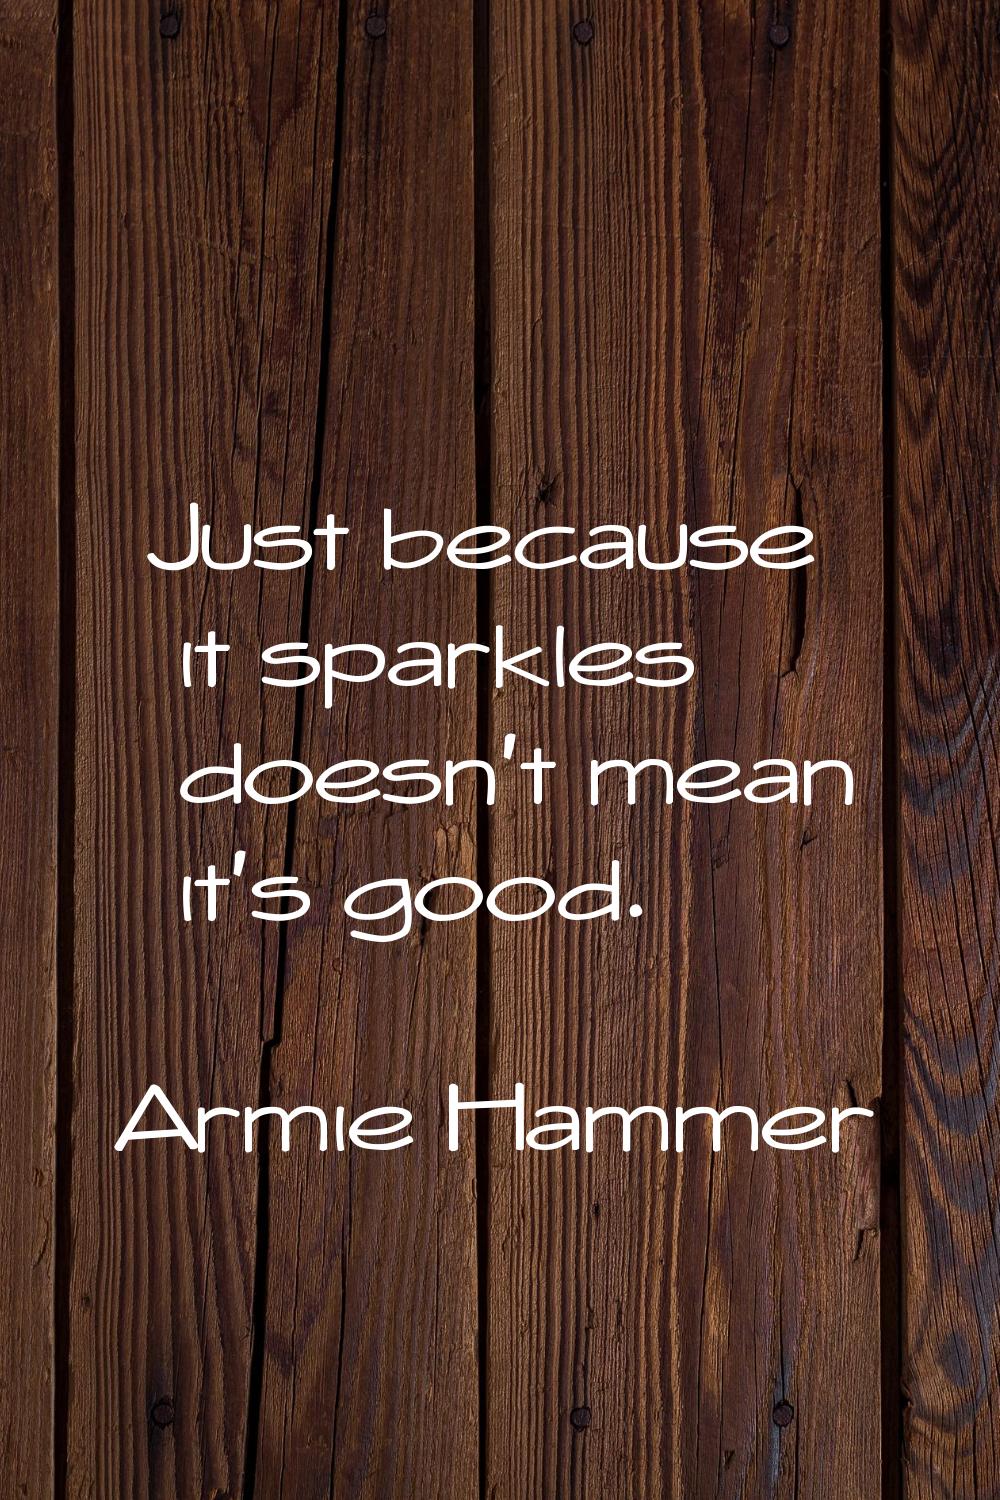 Just because it sparkles doesn't mean it's good.